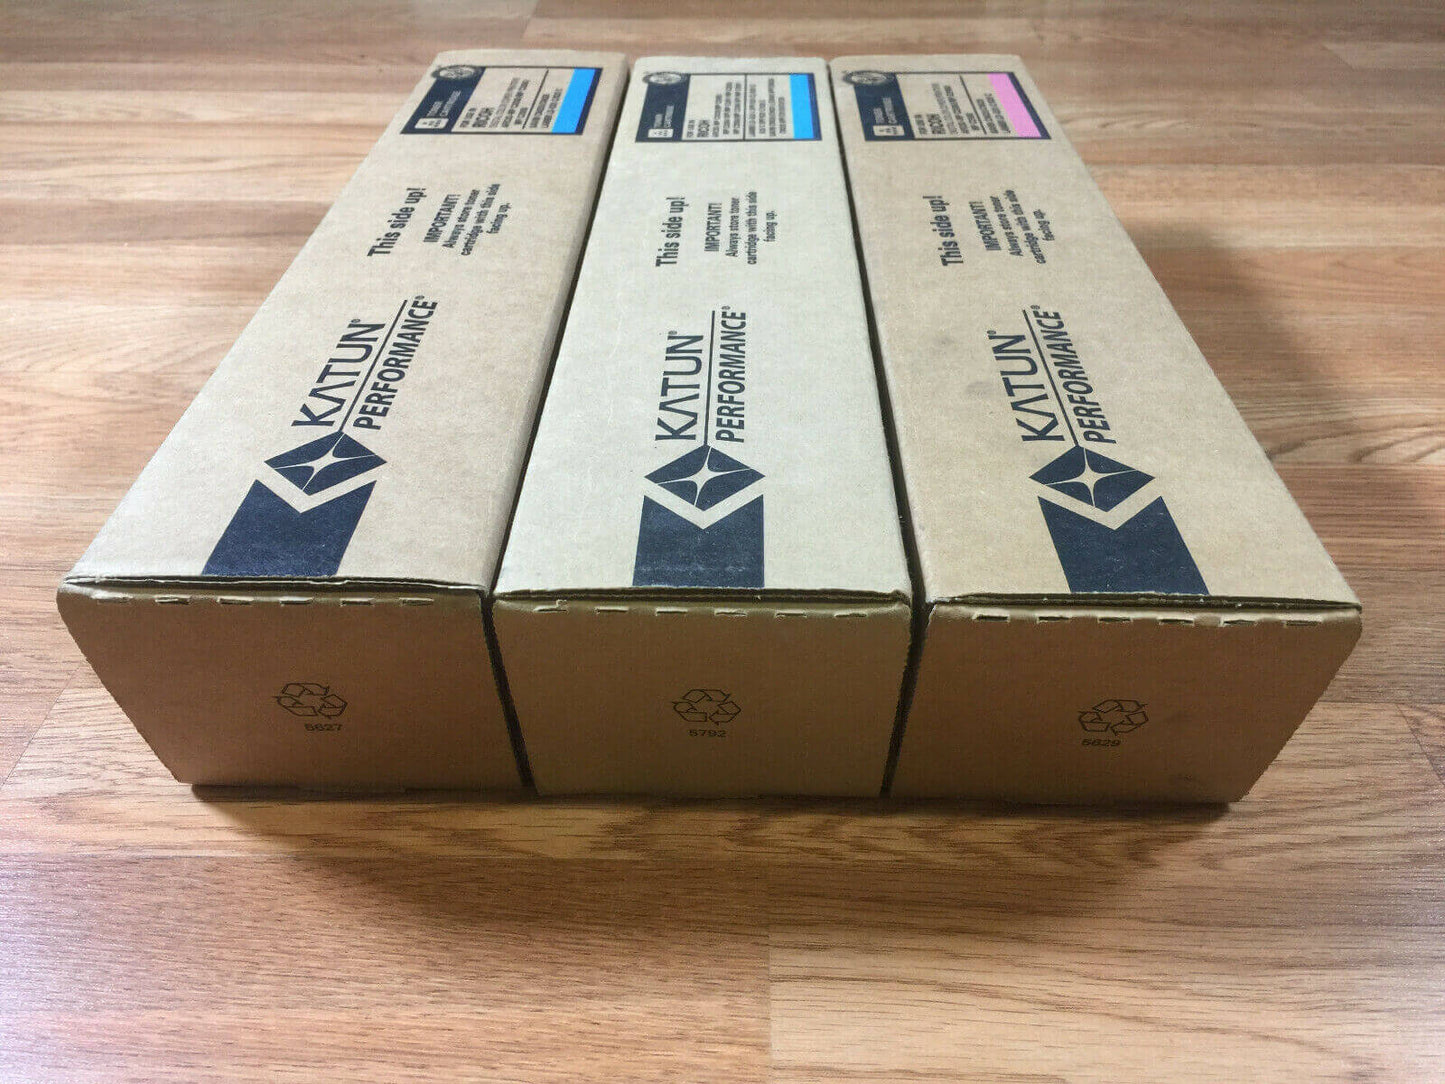 3 Compatible With Ricoh MP C2030 2050 2550 Cyan & Magenta Toner FedEx 2Day Air! - copier-clearance-center